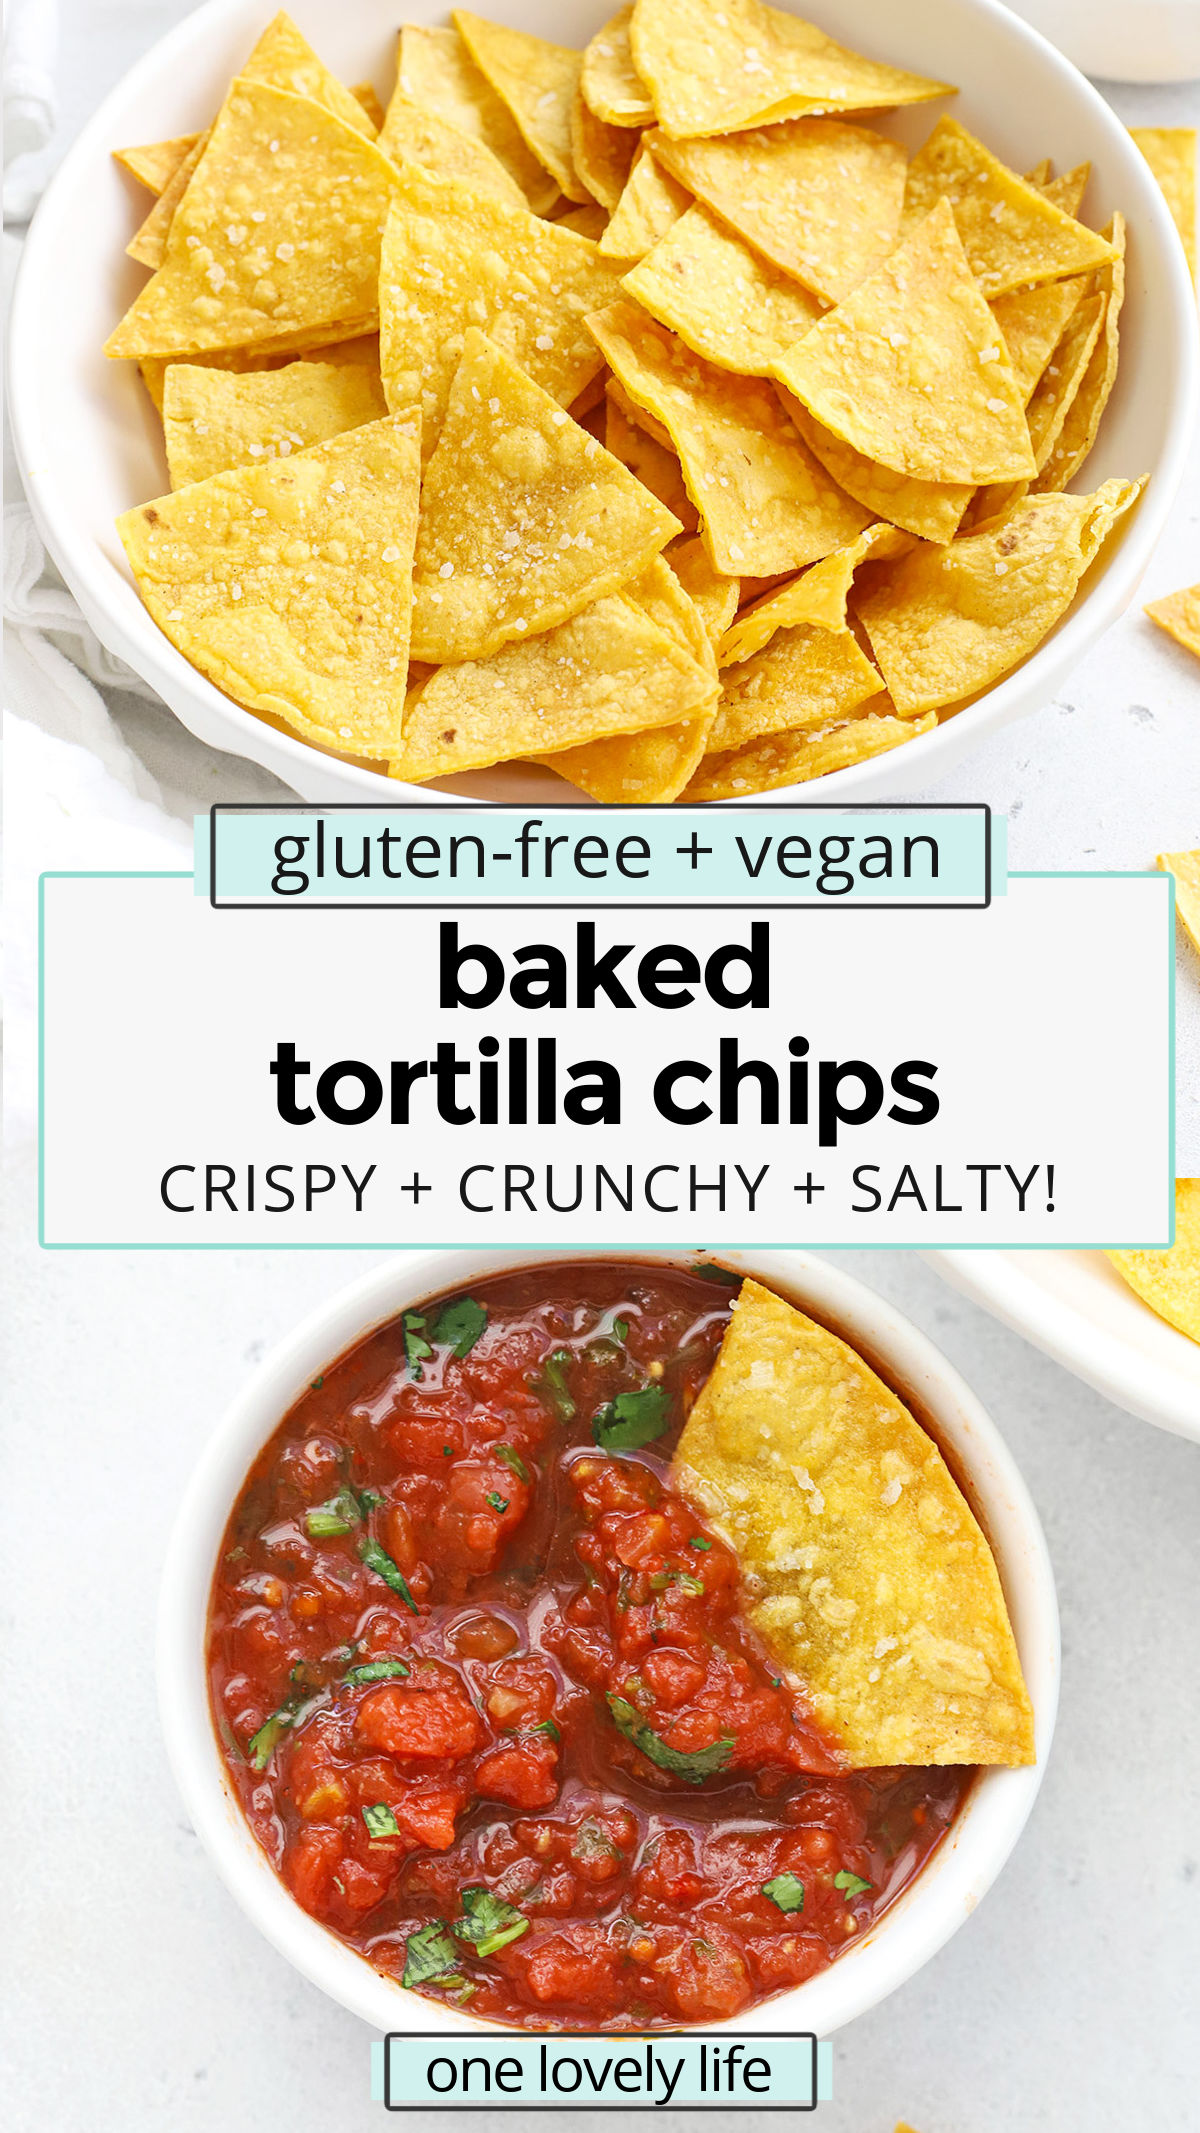 Baked Tortilla Chips - It's easy to make homemade tortilla chips in the oven! We love their salty, crispy crunch with salsa, guacamole & more. // healthy tortilla chips // healthy baked chips // baked chips // baked tortilla chips recipe // healthy tortilla chips recipe //